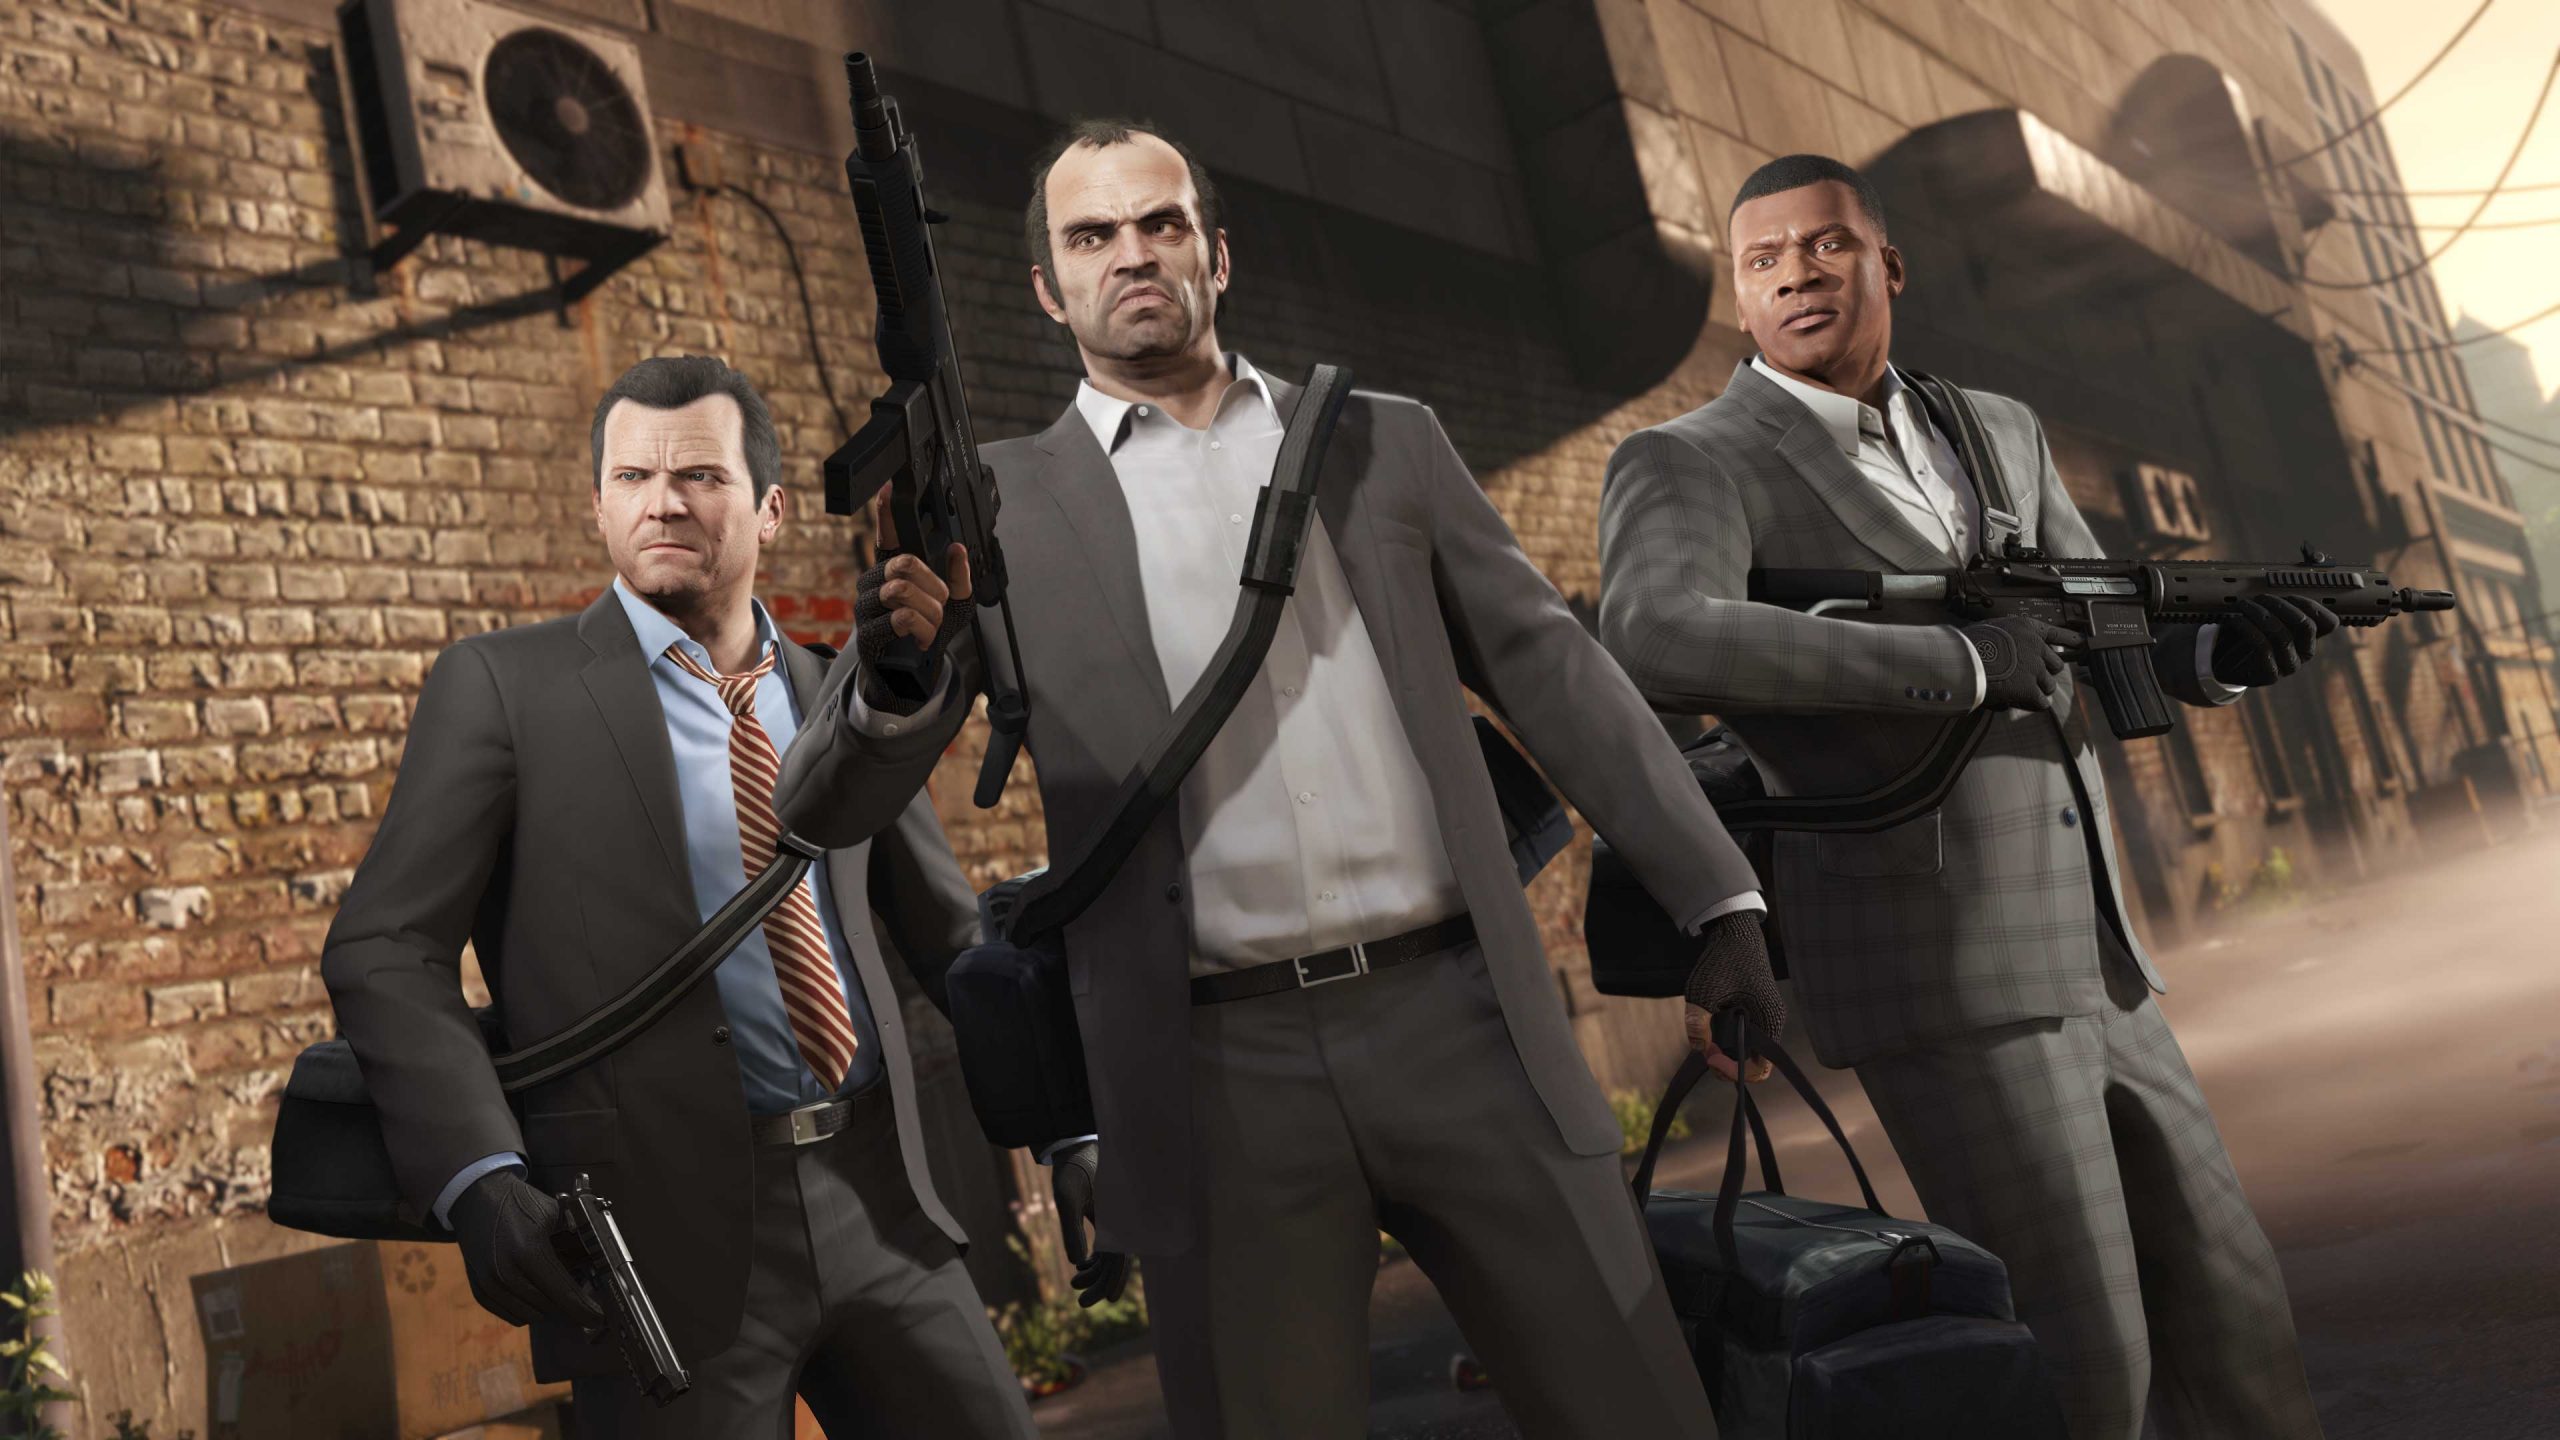 GTA 5 Expanded and Enhanced received poor user ratings on Metacritic